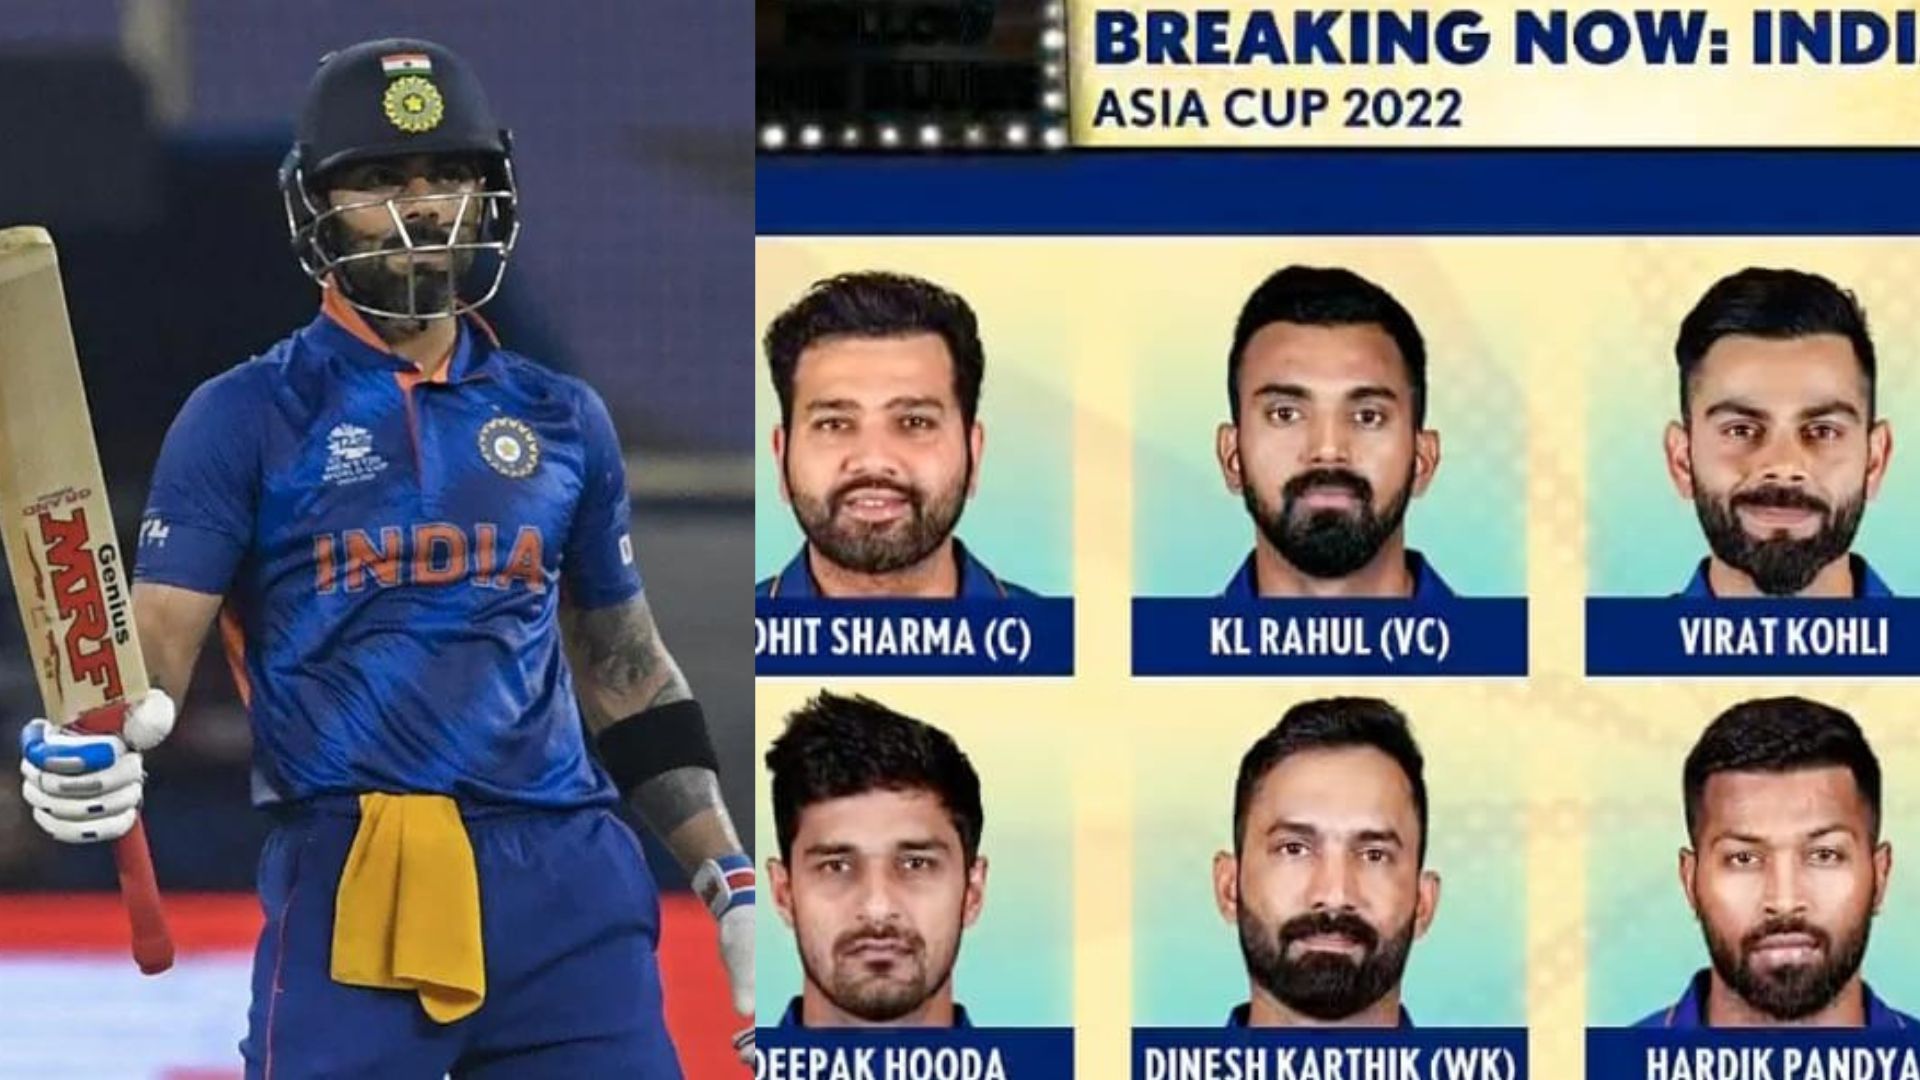 The team management has backed Virat Kohli to come good in the Asia Cup. (P.C.:Hotstar &amp; Twitter)